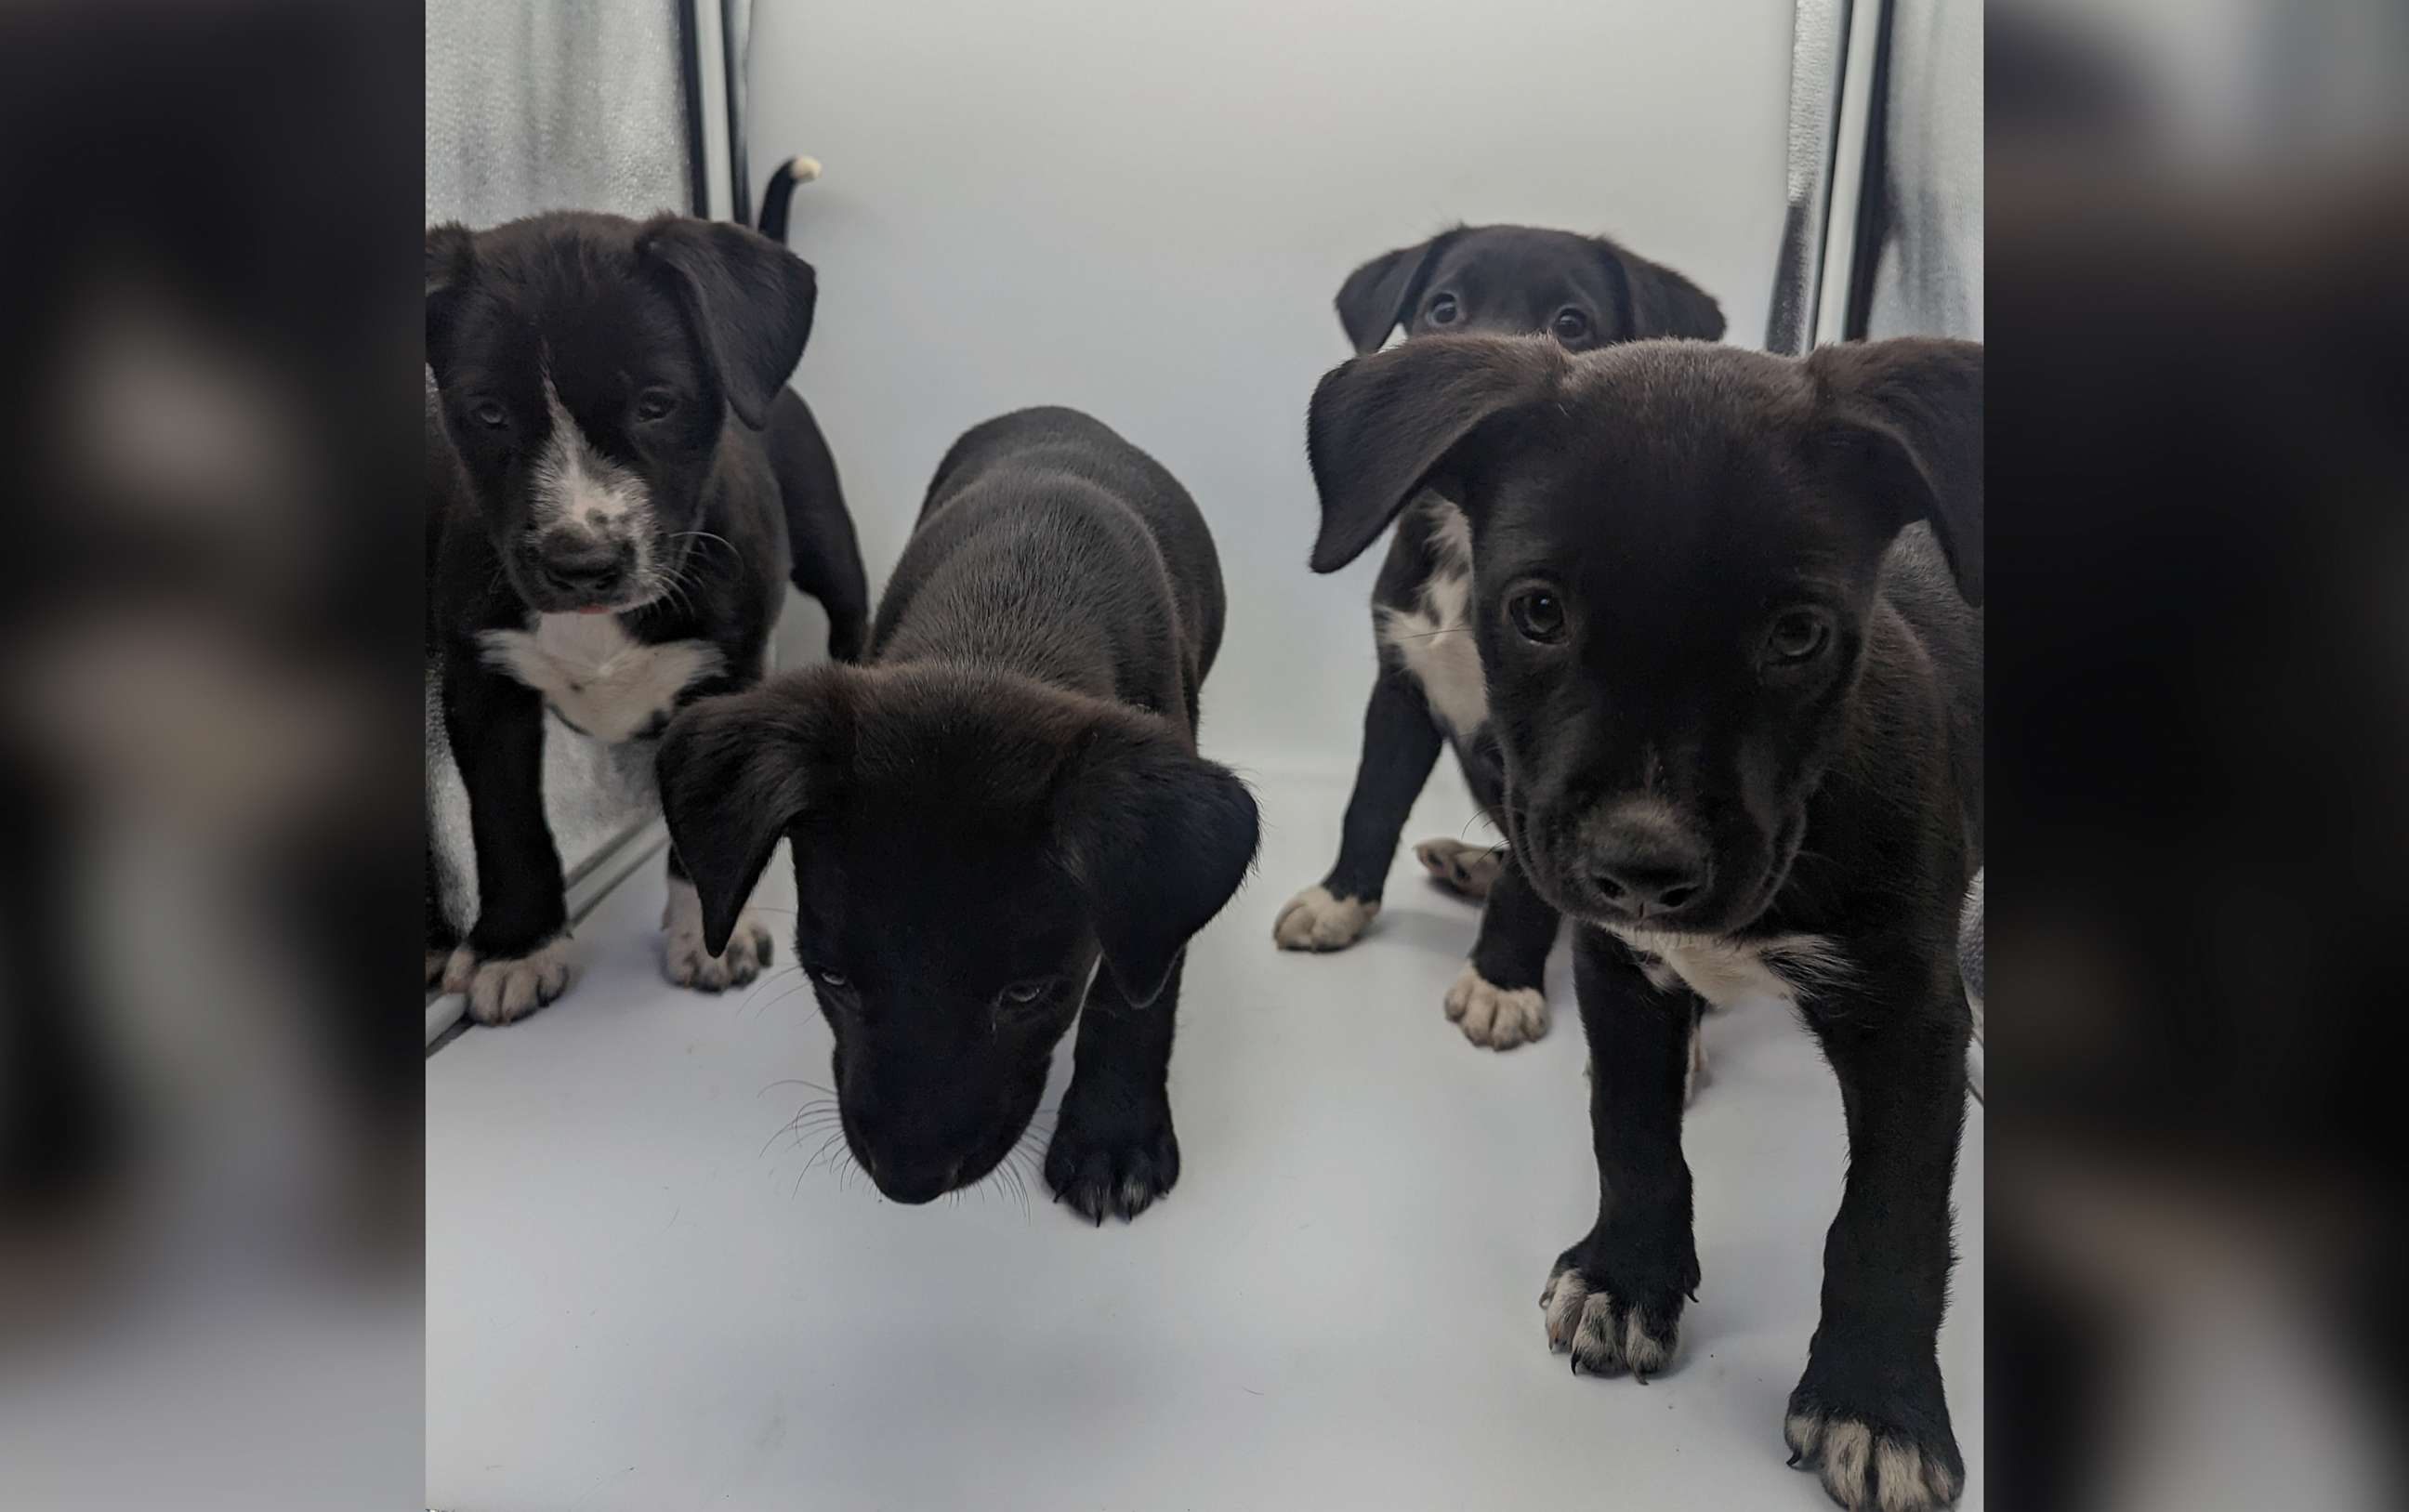 PHOTO: A local animal shelter in Tampa, Fla., has named four of its adoptable puppies after Taylor Swift songs in honor of her concert stops in Tampa.